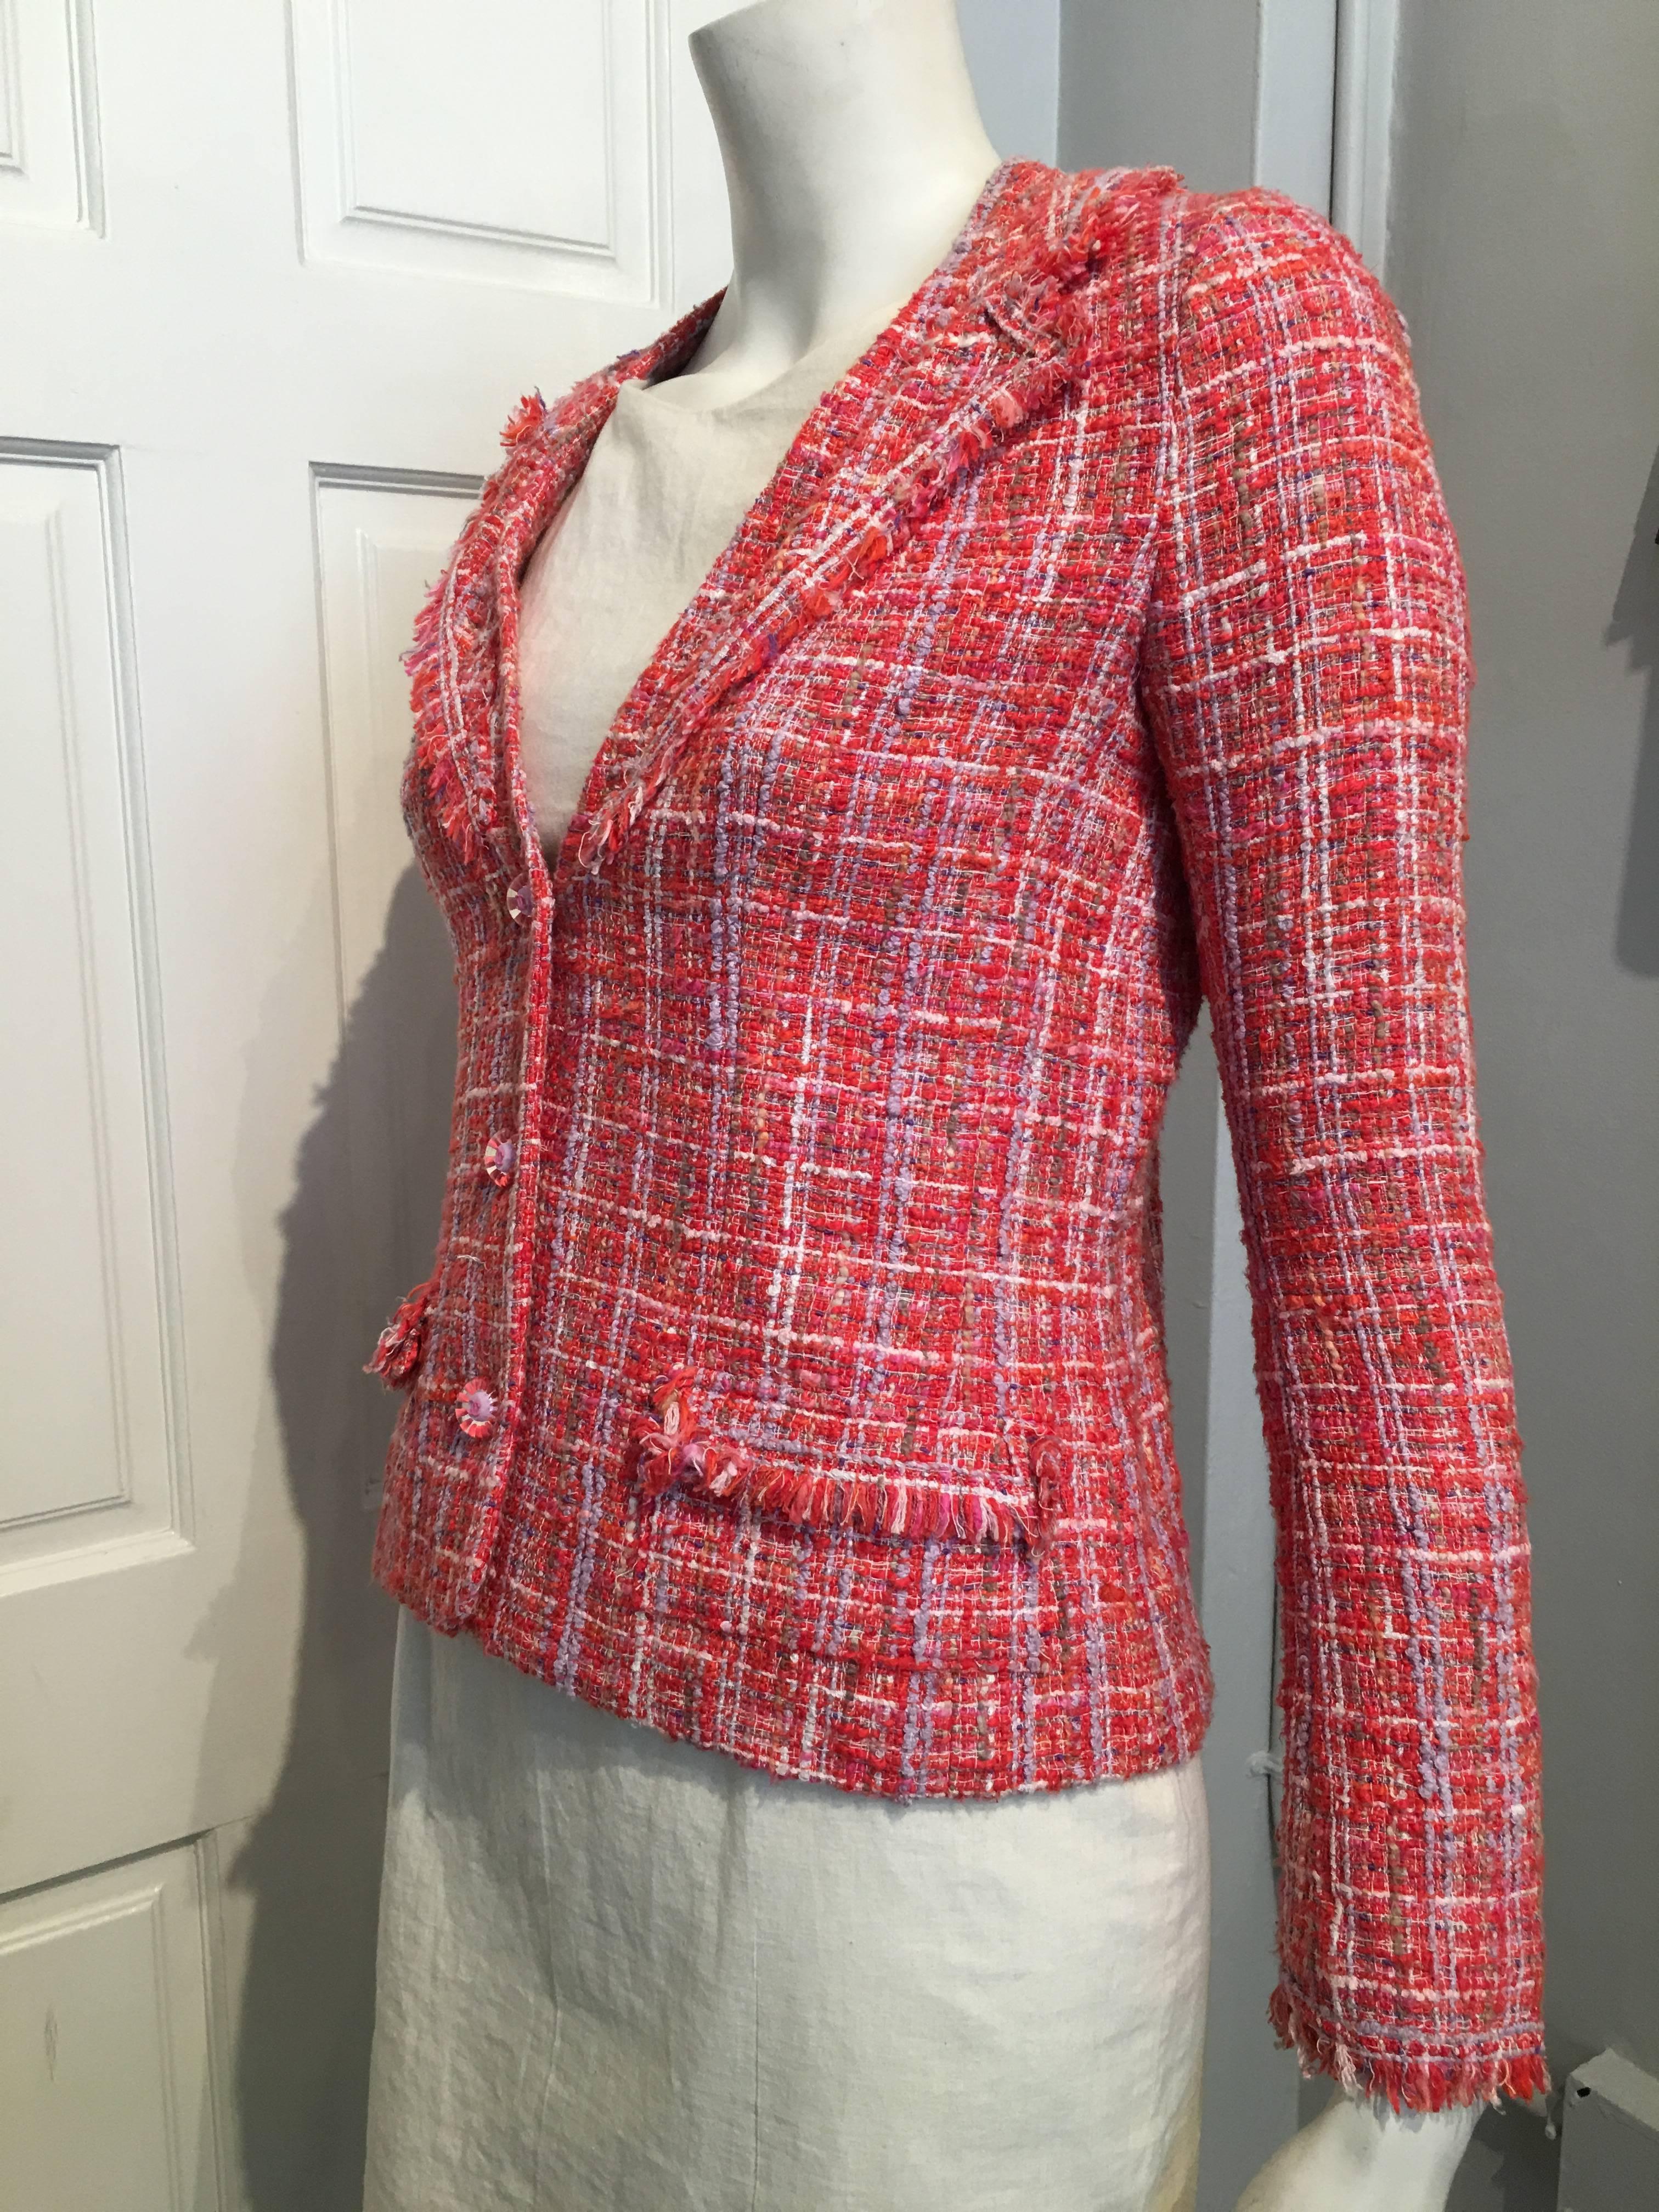 A charming Chanel coral and white tweed jacket with accents of lavender, tan and hot pink. It has fringed faux lapels and fringed shallow pockets, The buttons are clear plastic with the iconic CC logo in pink on white and  surrounded by coral